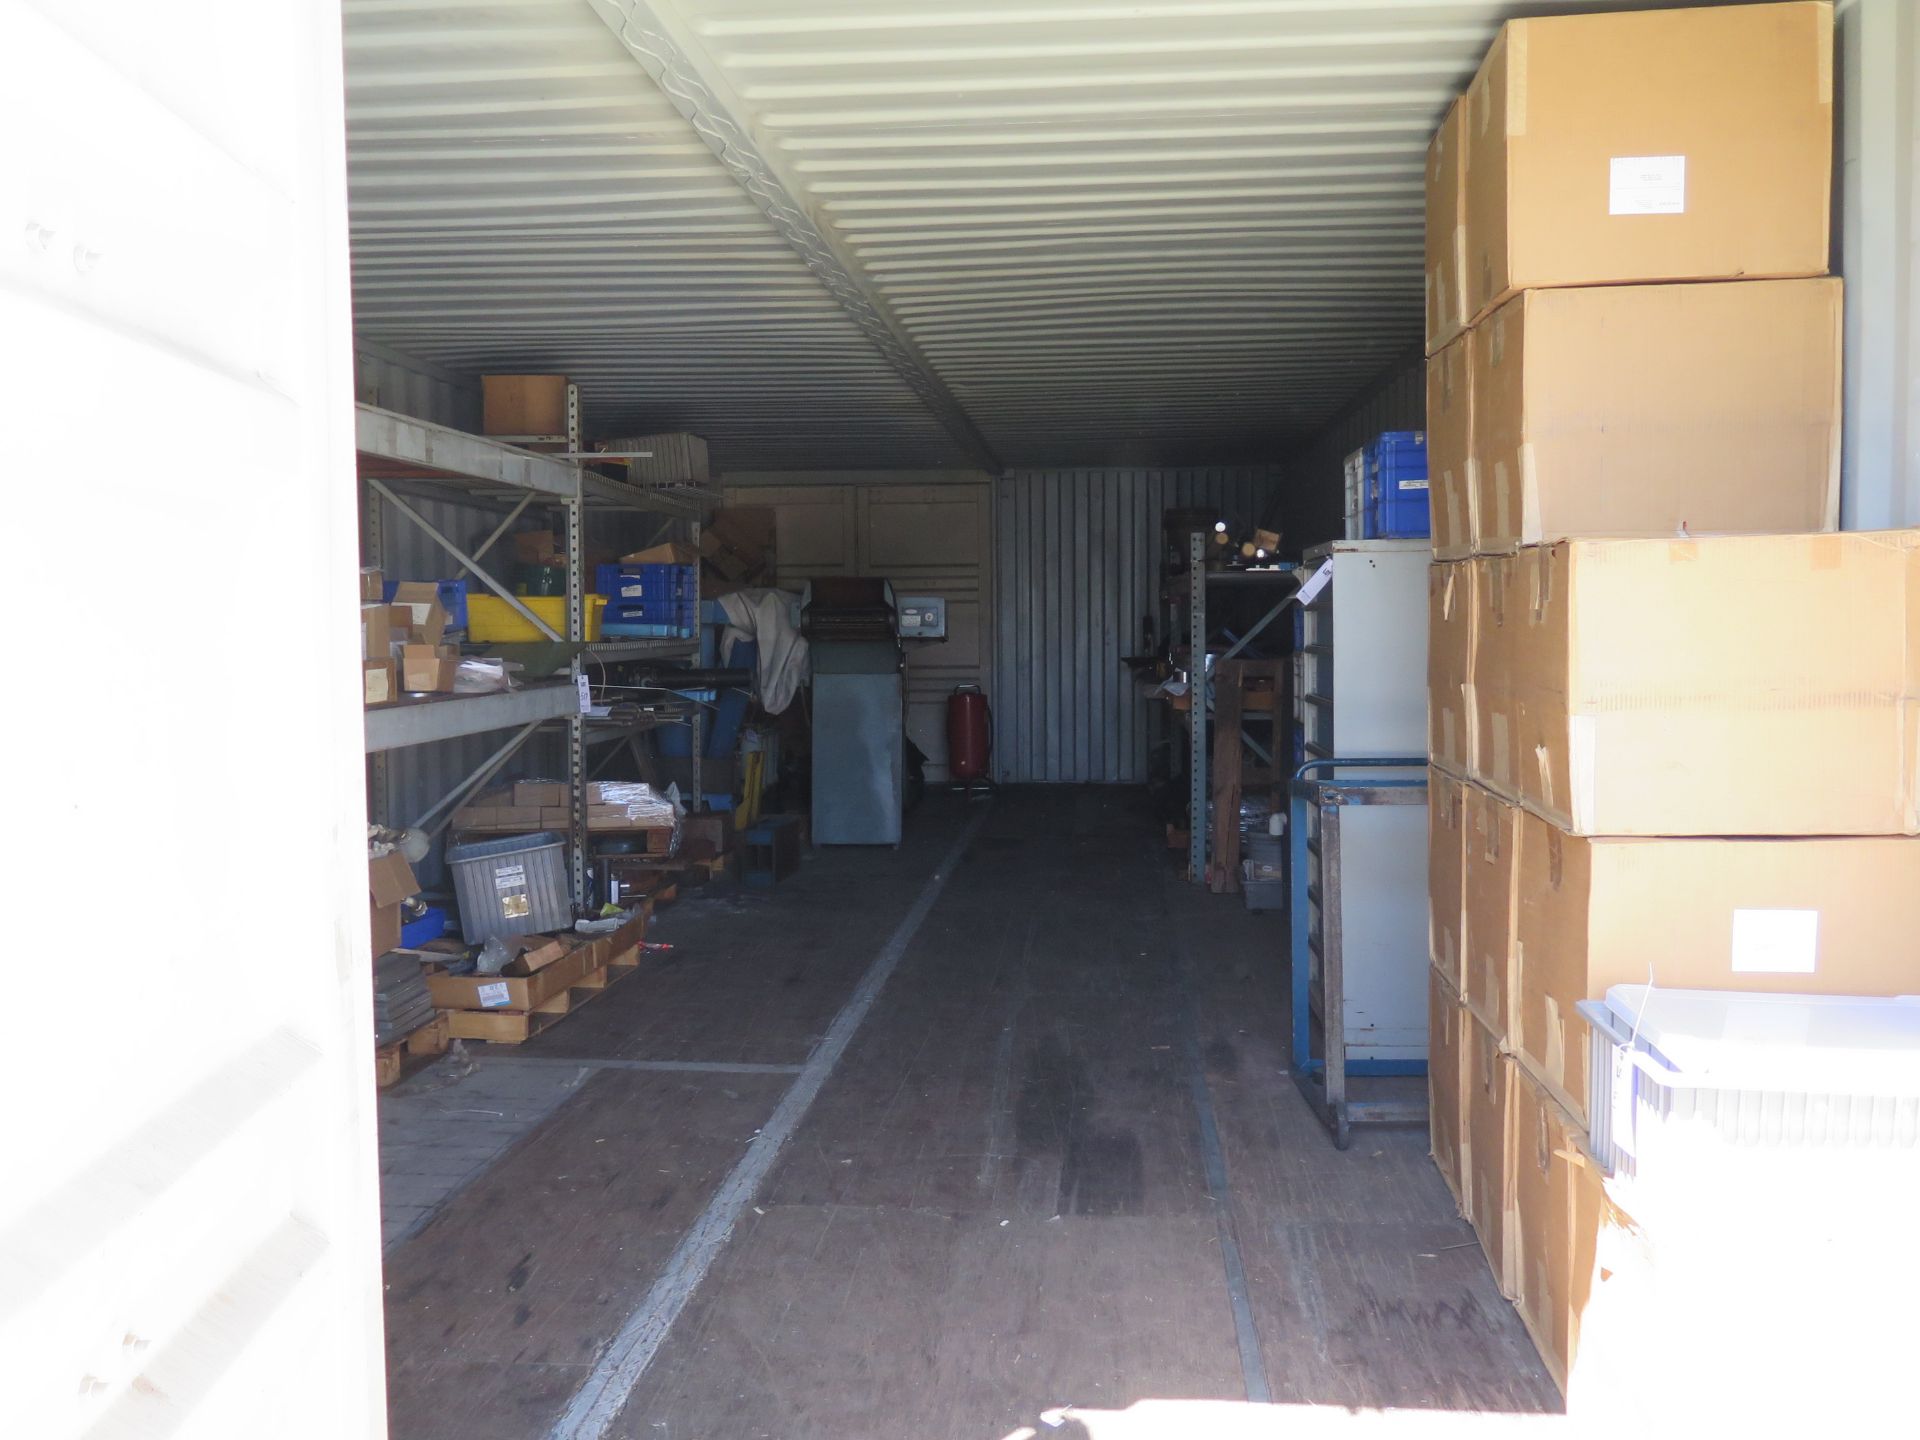 40' DOUBLE-WIDE STORAGE CONTAINER (WELDED TOGATHER) - Image 2 of 4